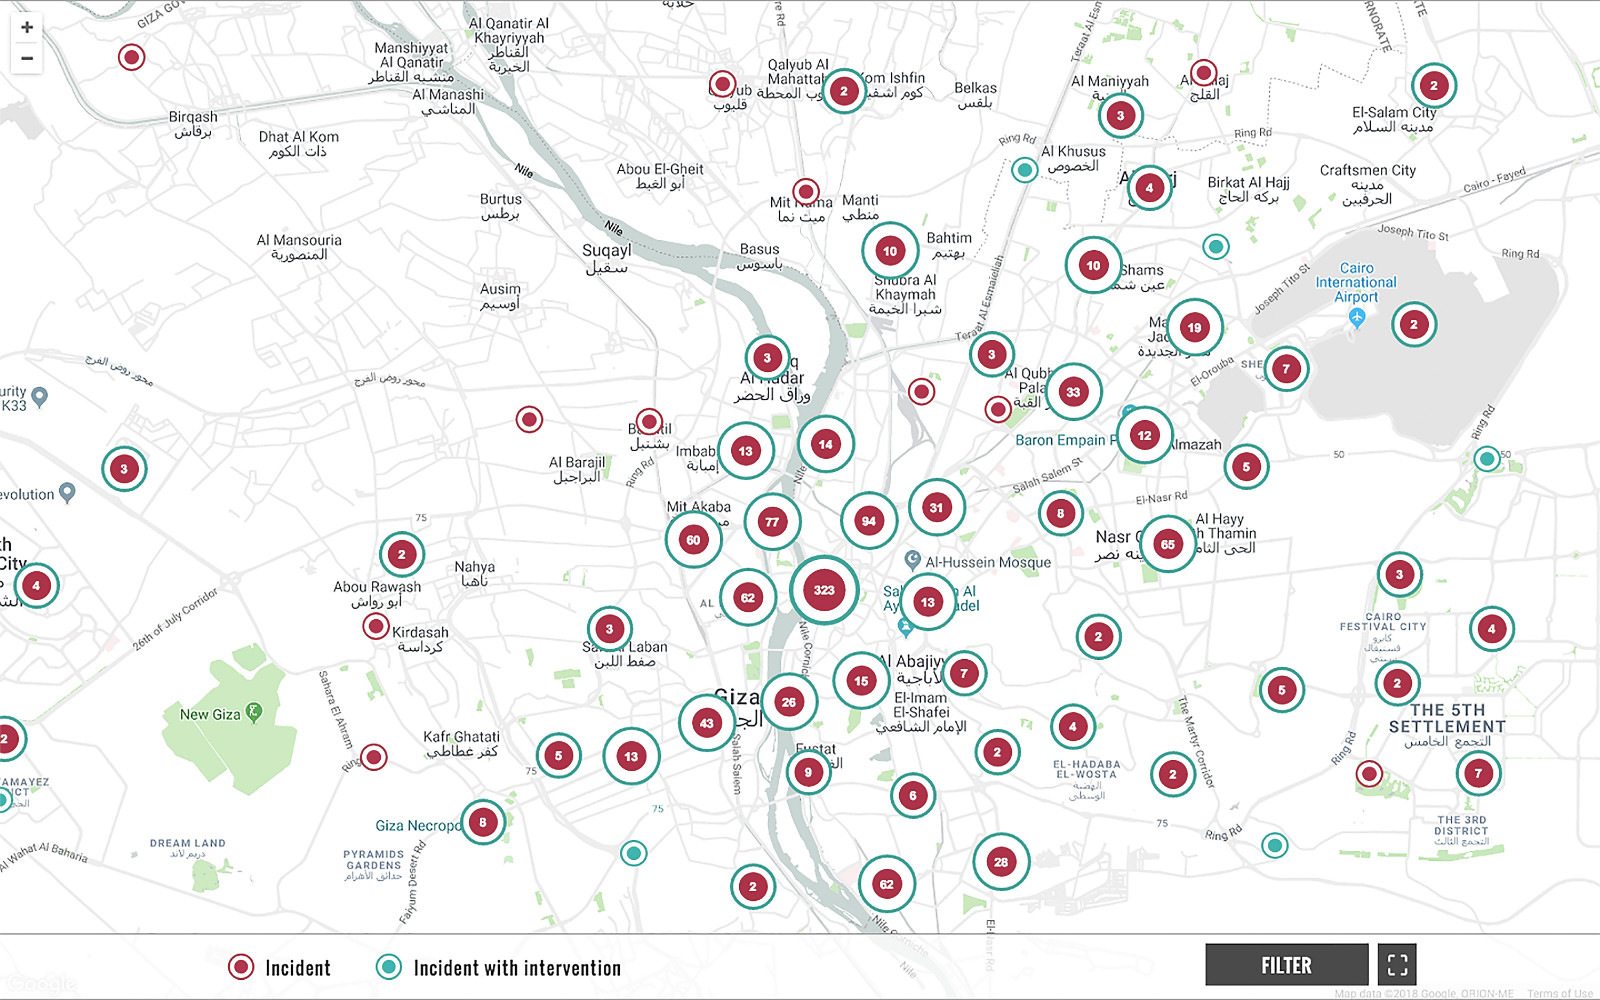 Incidents of sexual harassment in Cairo, Egypt identified on a web map